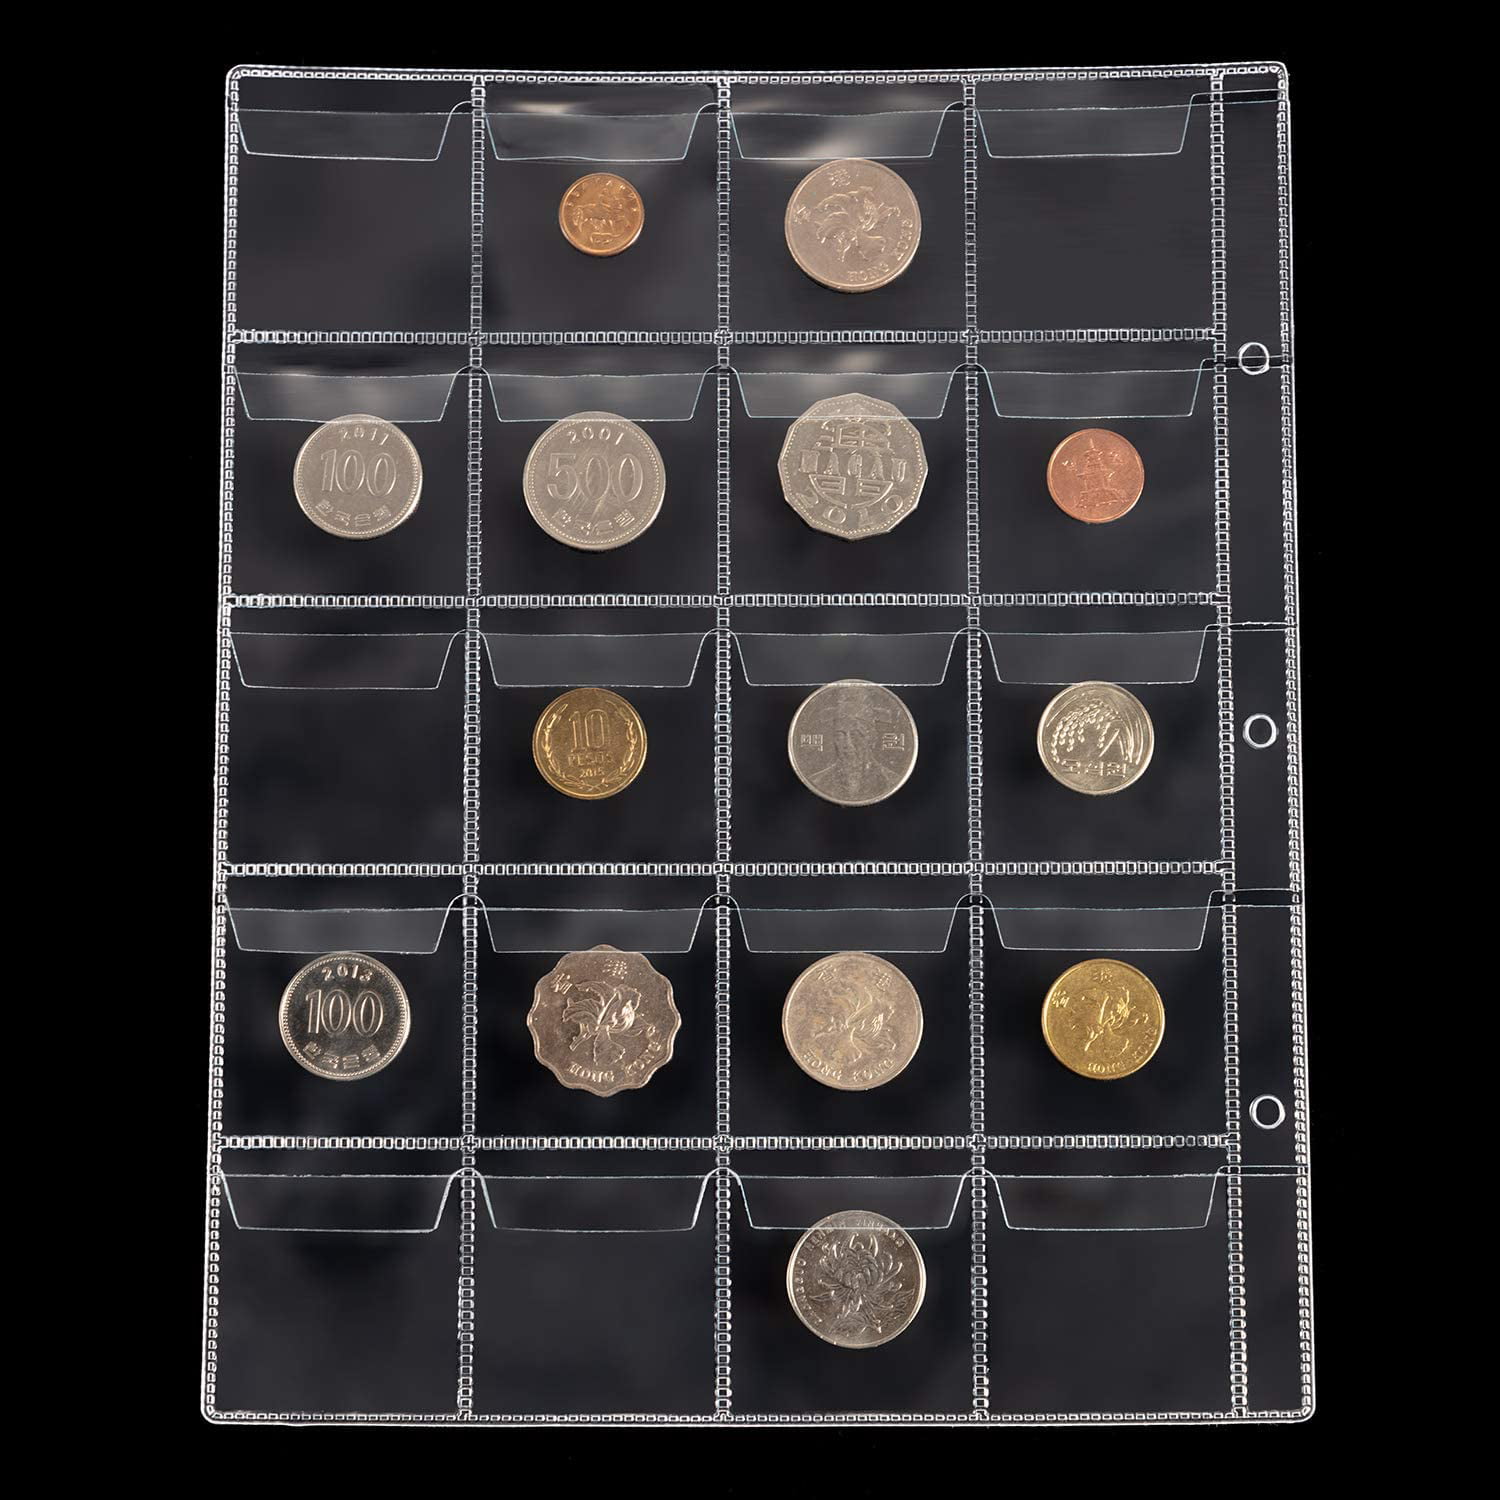 6 Pockets 2.68 X 2.84 55mm PELLERS 10 Collectors Sheets for Very Big Coins up to 2.17 On Each Page Model M Extra Transparent 68mm X 72mm